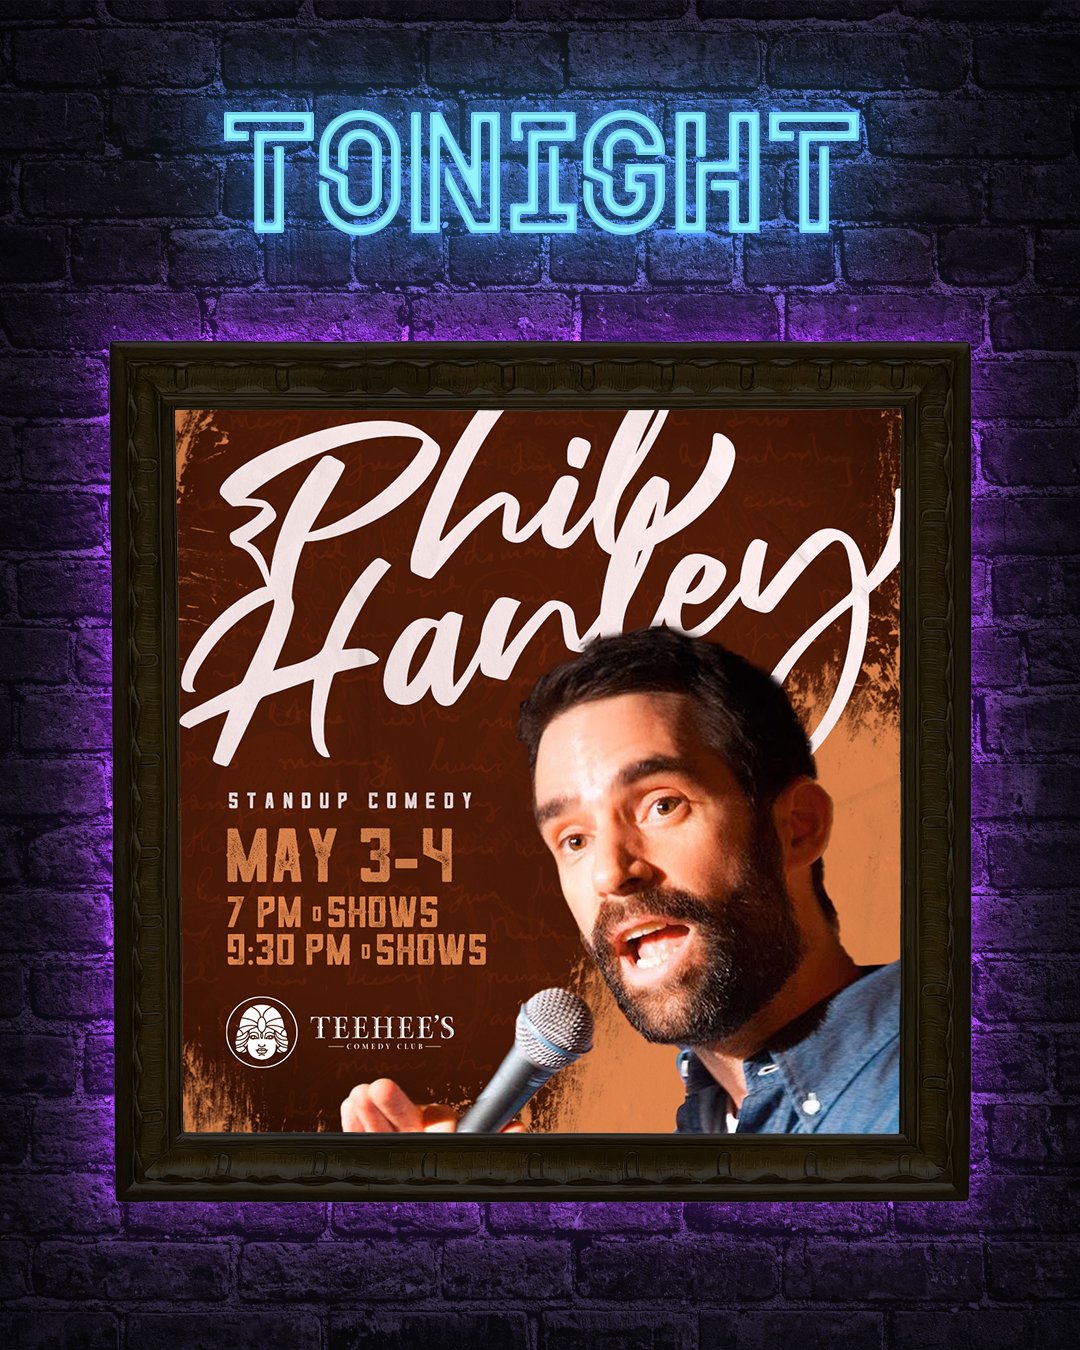 🎤🦩🍸 Night one with Phil Hanley starts tonight!
Get 🎟🎟🎟 at teeheescomedy.com/shows